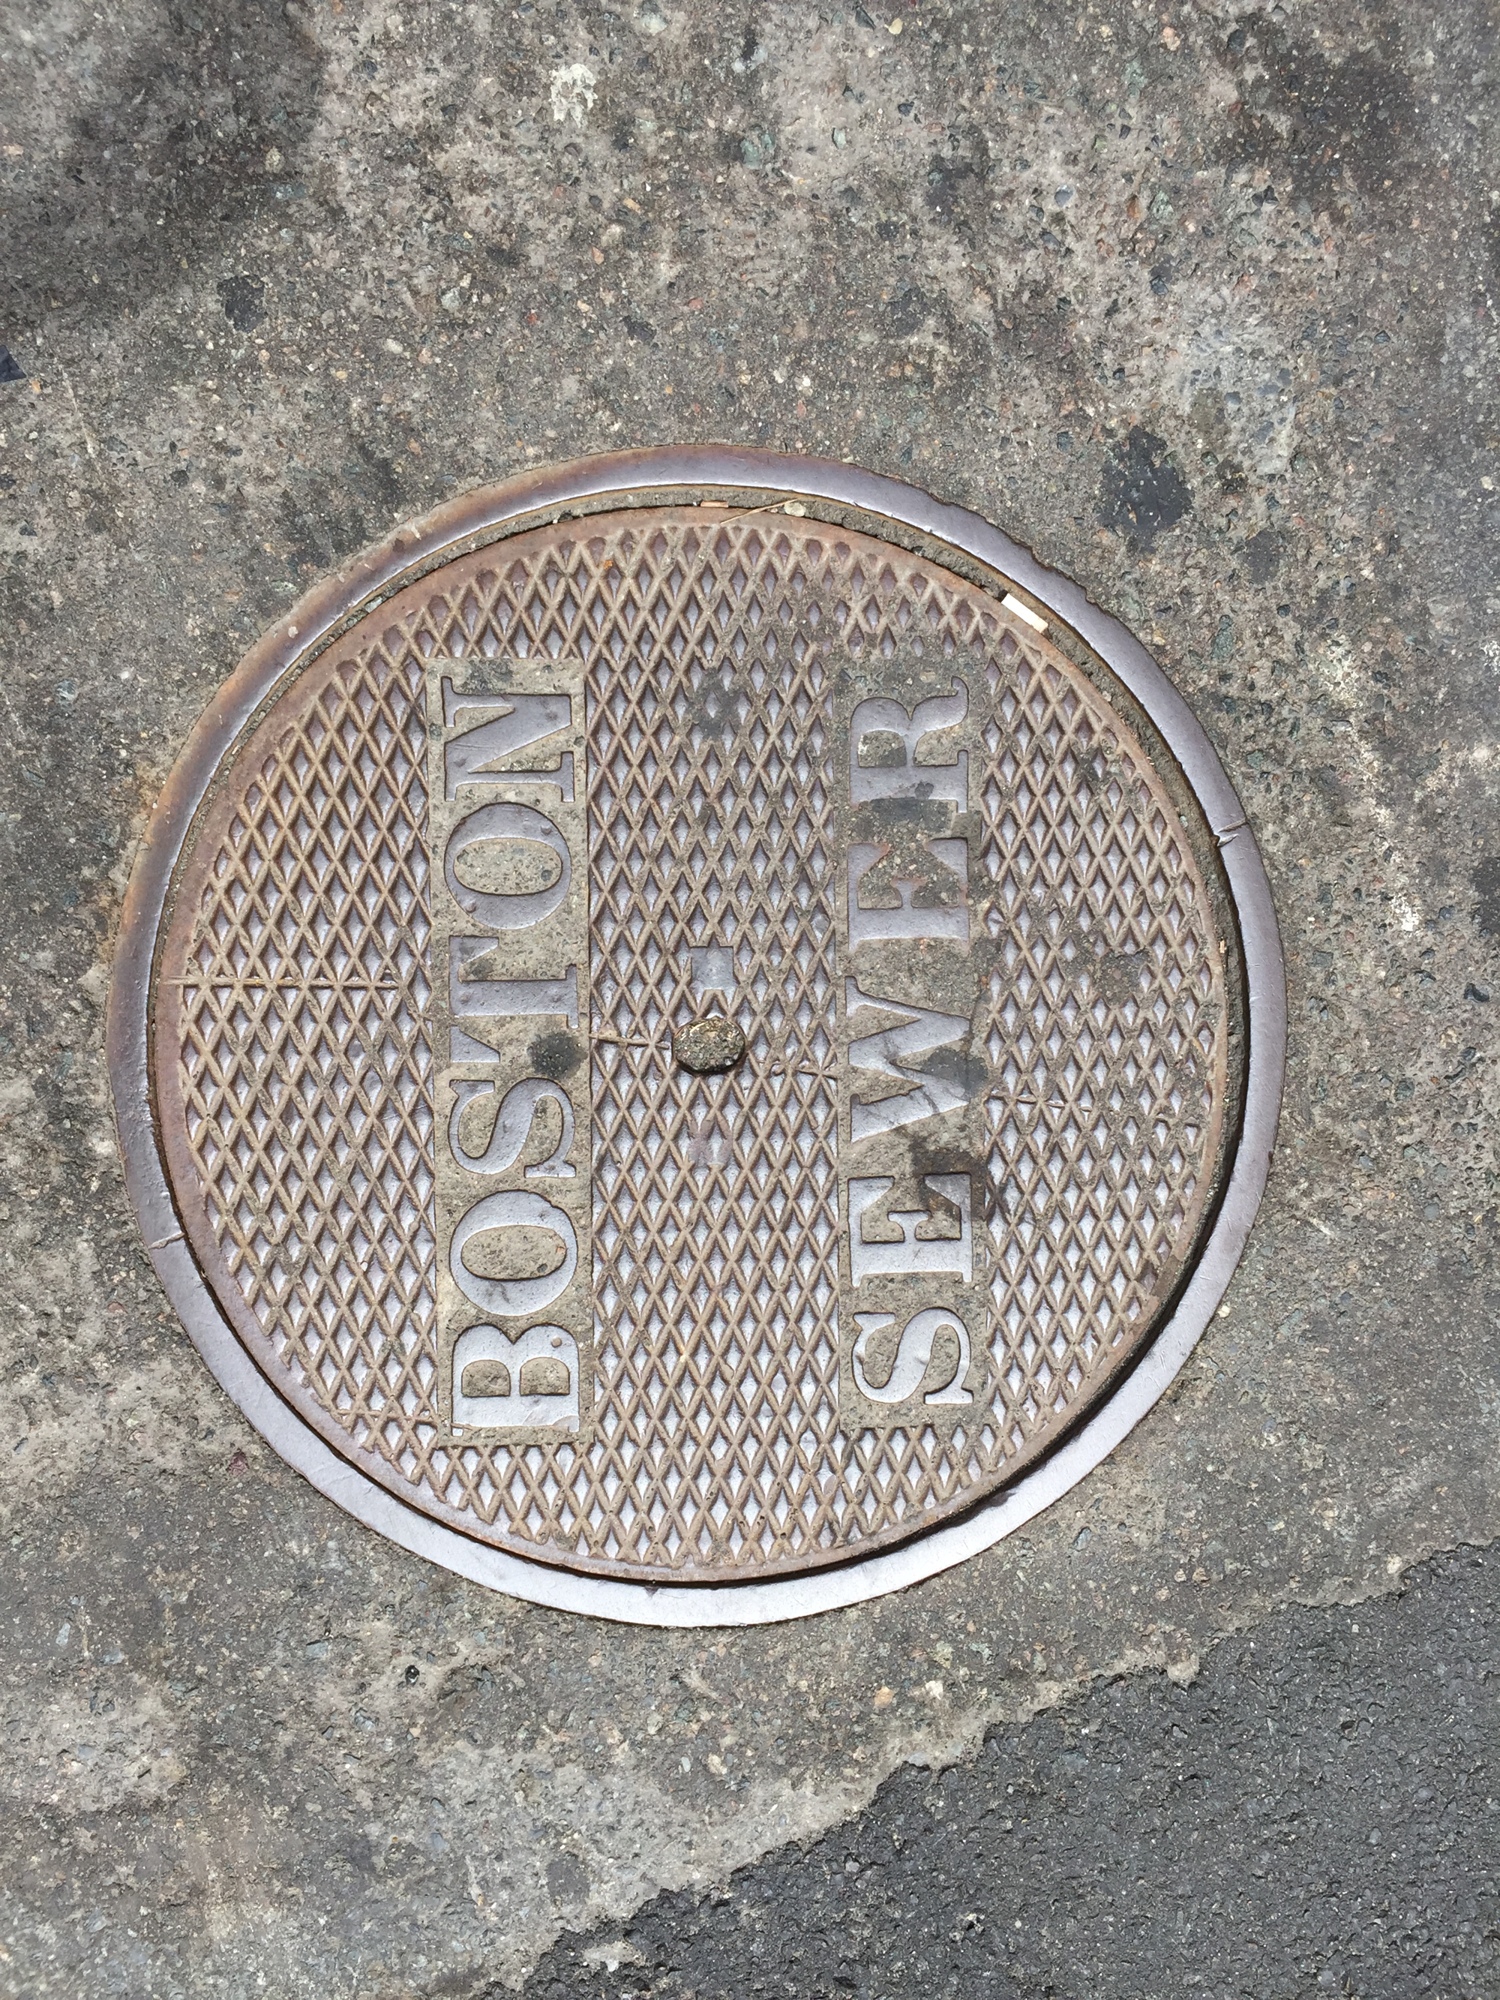 Courtesy. David Farmer has taken pictures of manhole covers across the world, such as this one in Boston.